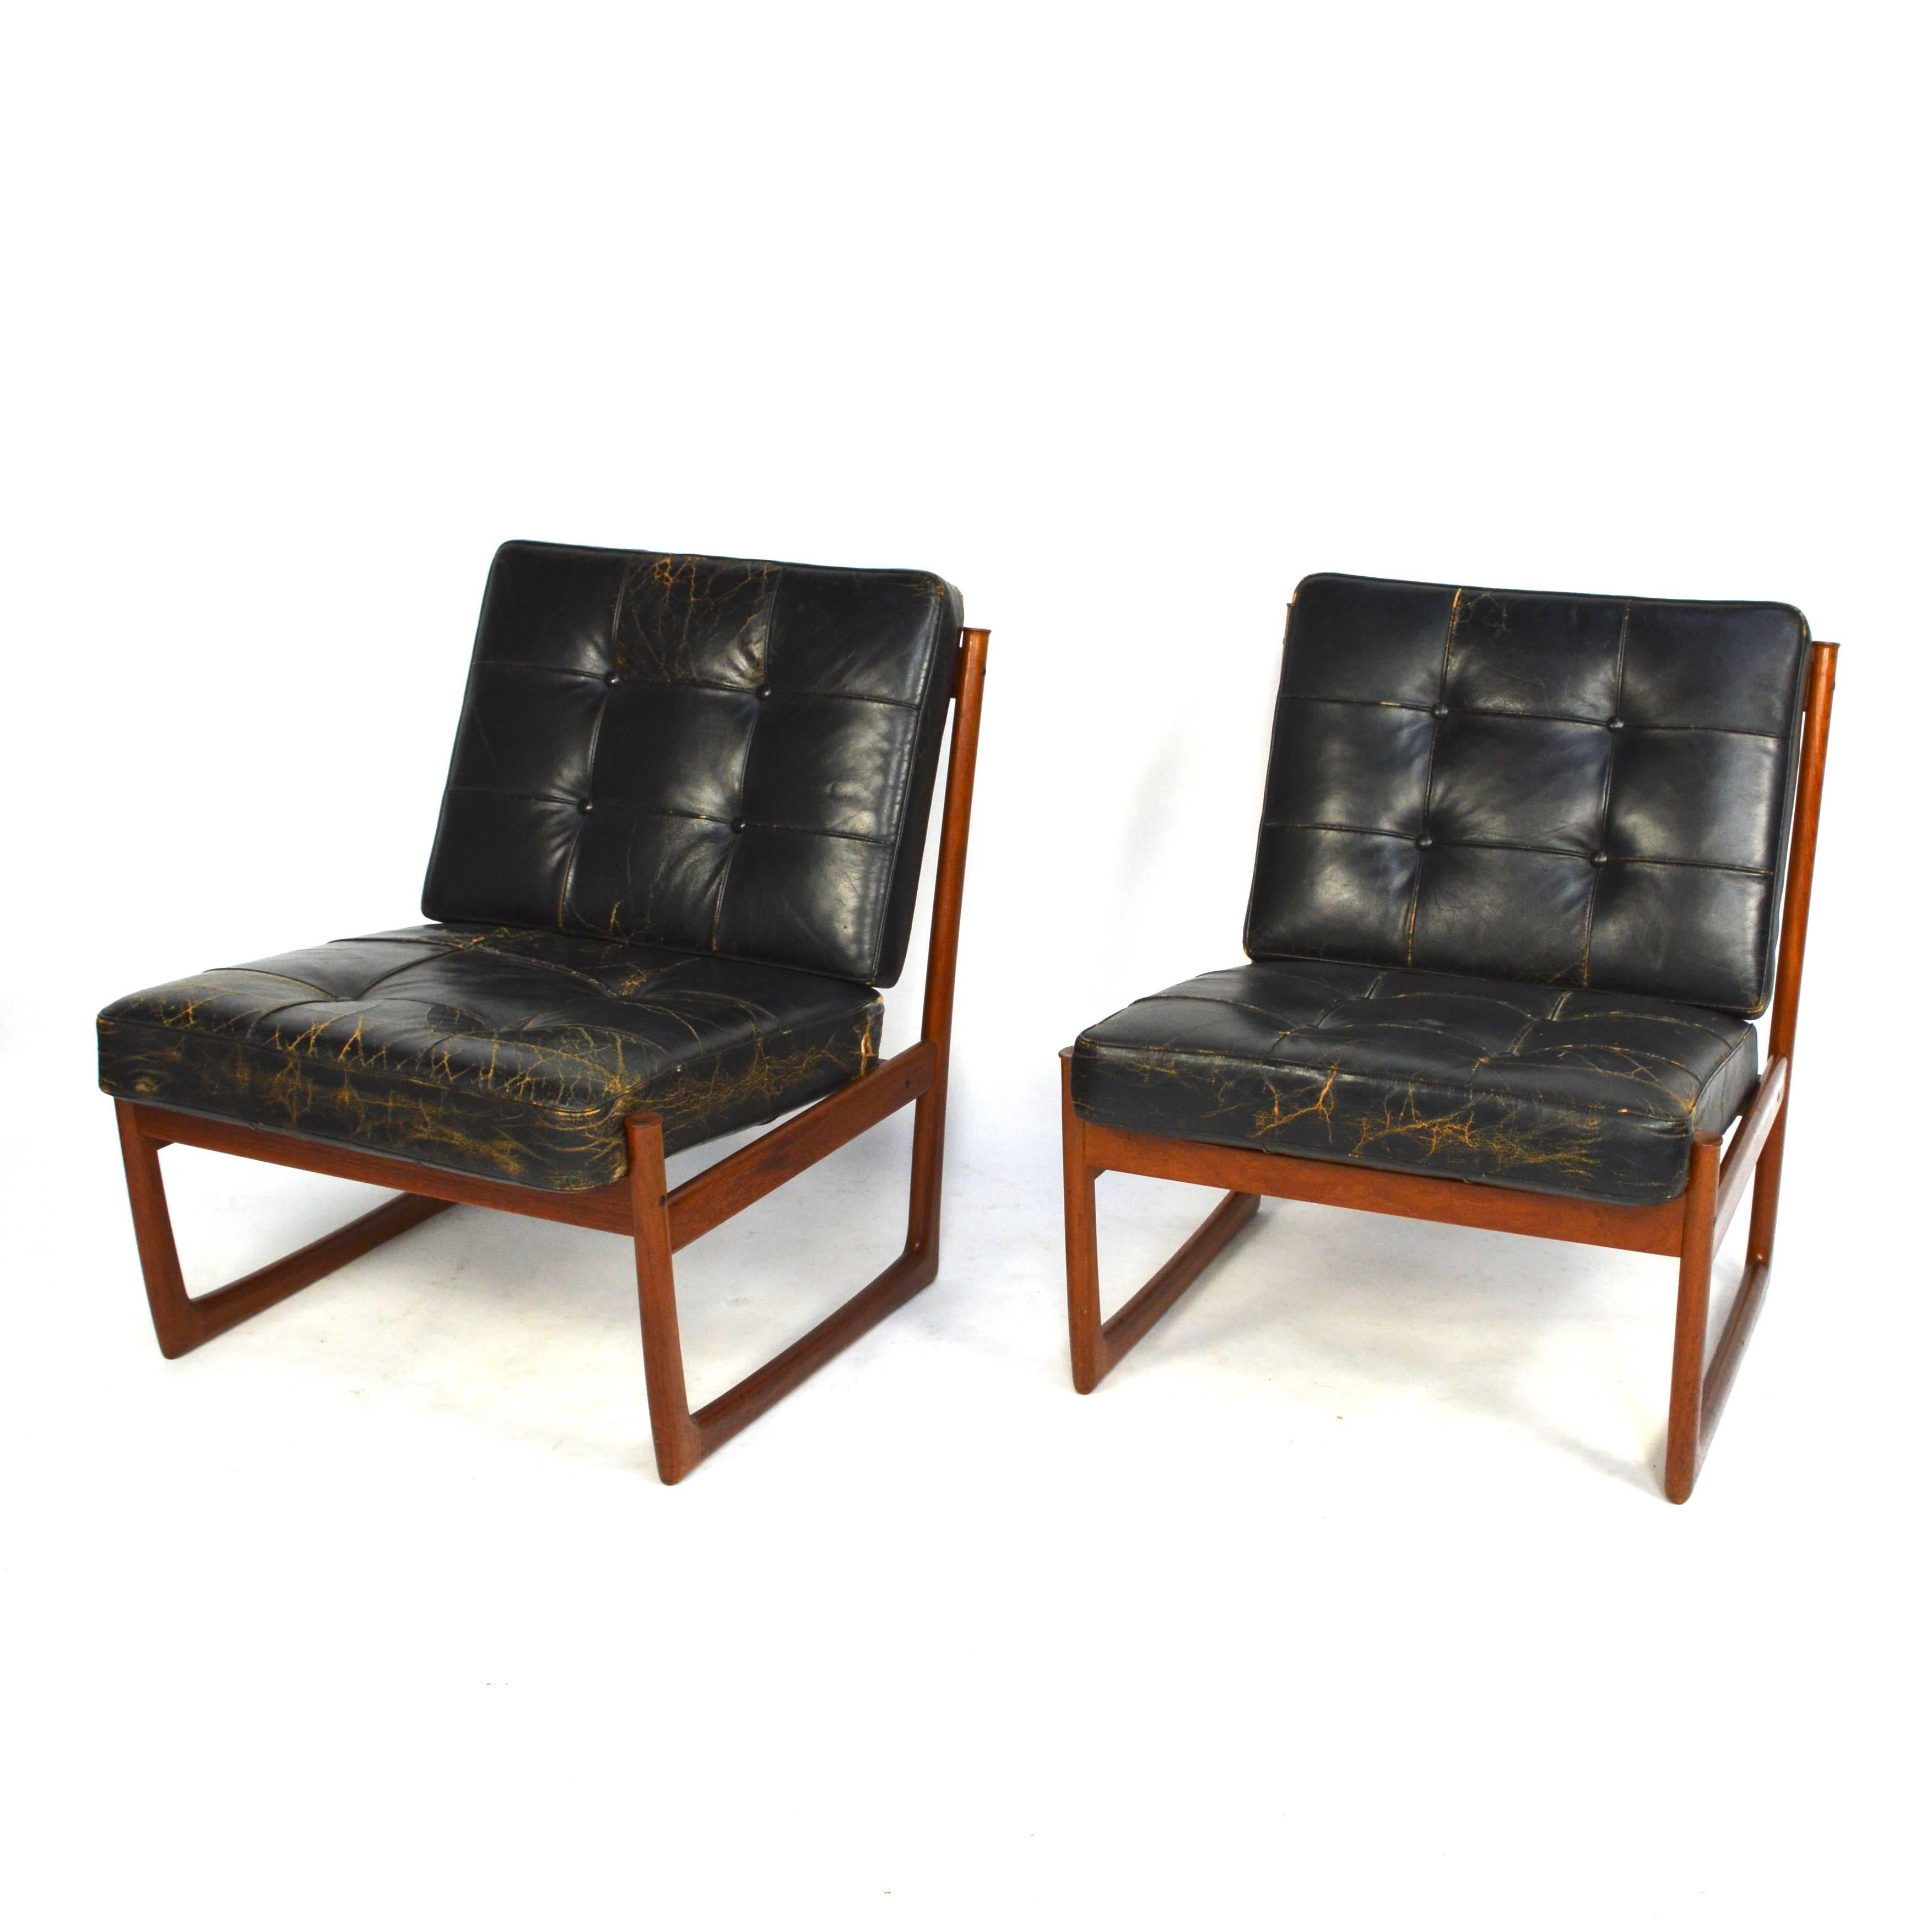 Leather Pair of Danish Teak Lounge Chairs Model FD130 by Peter Hvidt and Orla Mølgaard